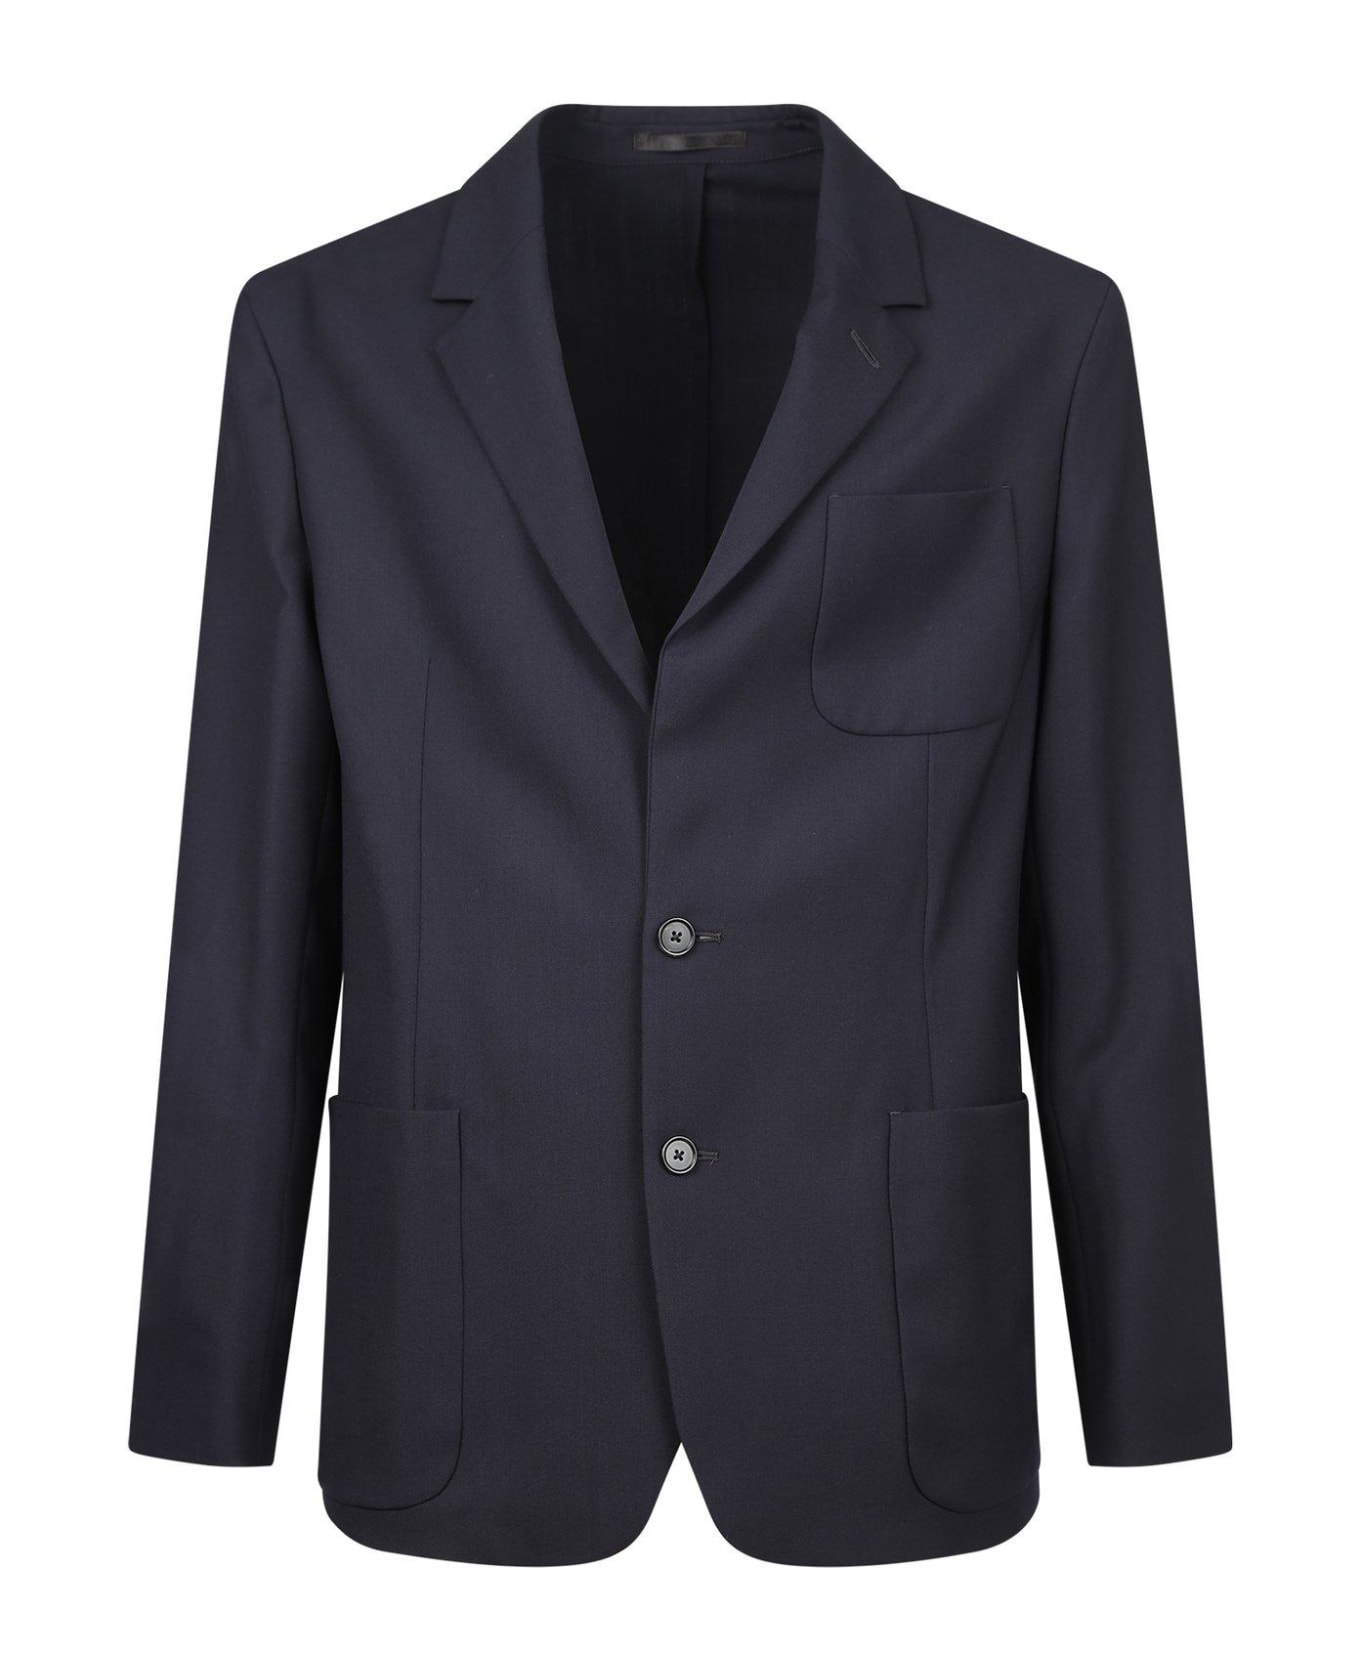 PS by Paul Smith A Suit To Travel In Unlined Blazer Blazer - DARK NAVY